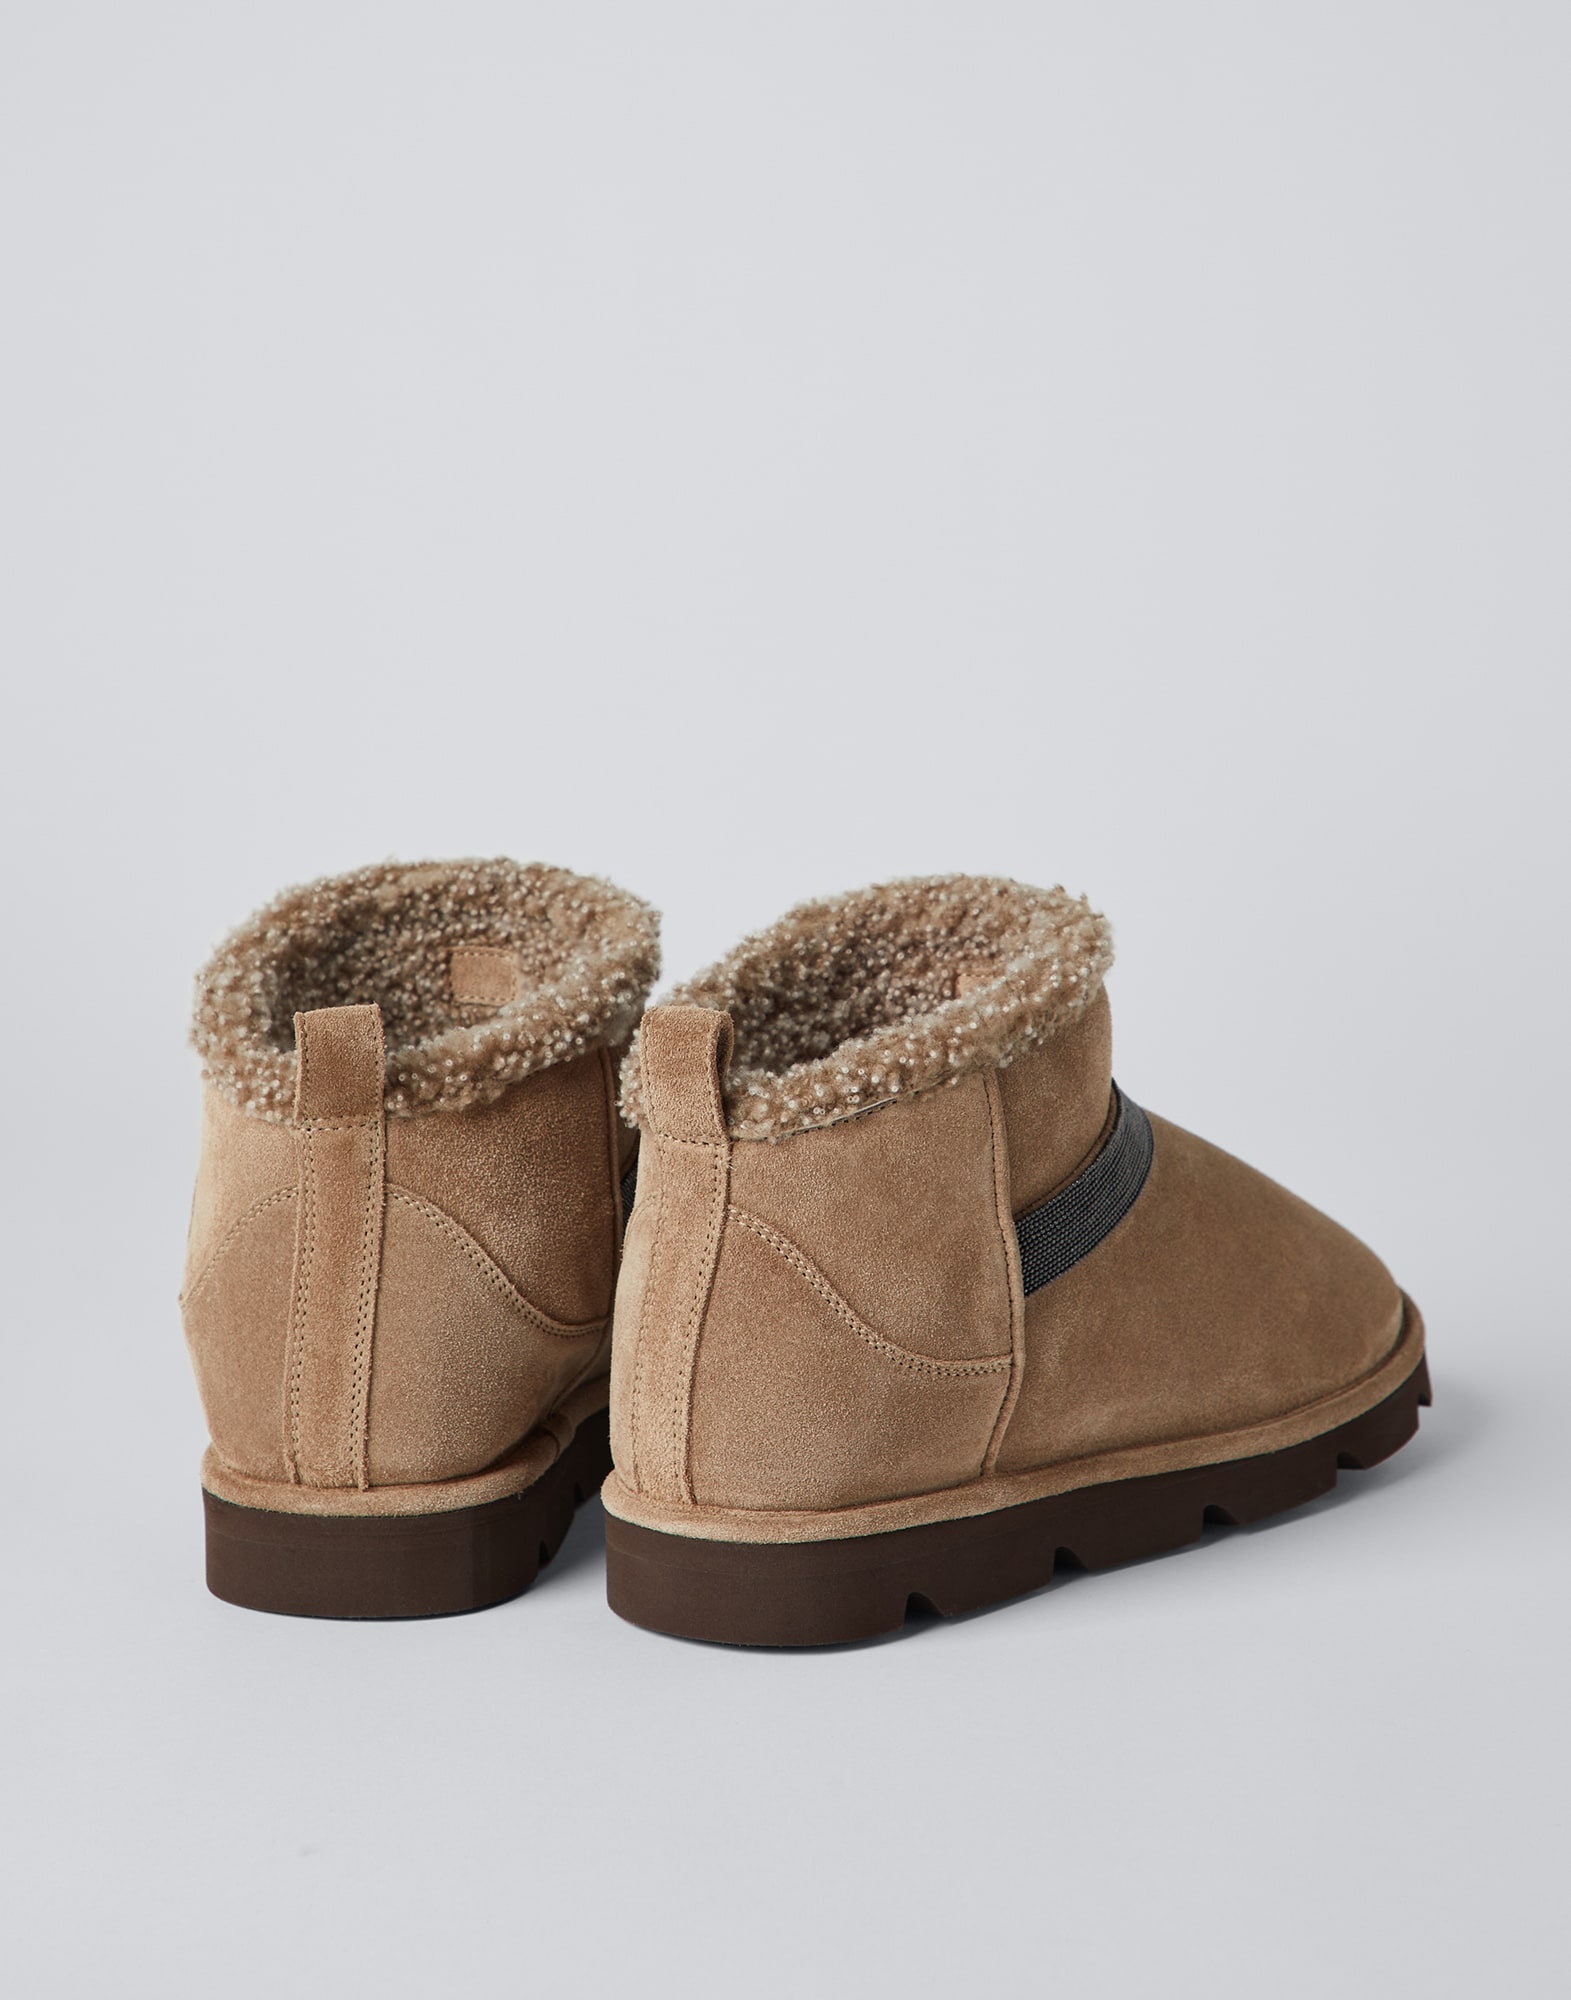 Suede boots with shearling lining and shiny band - 2